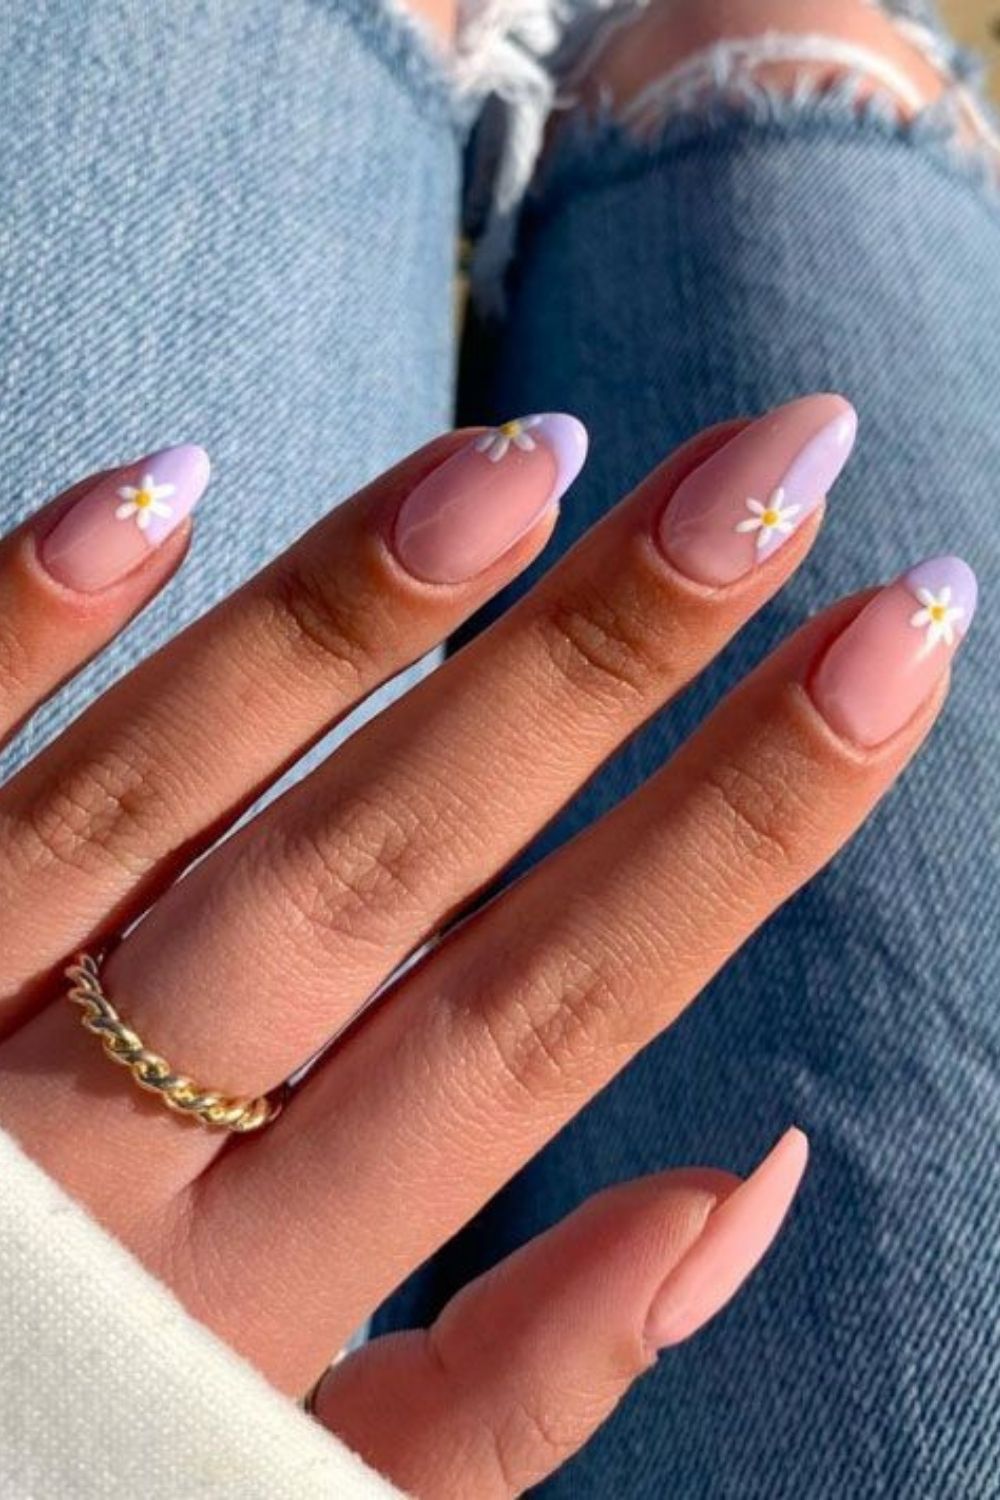 From Abstract to Simple: Nail Art for Your Every Whim | Skillshare Blog